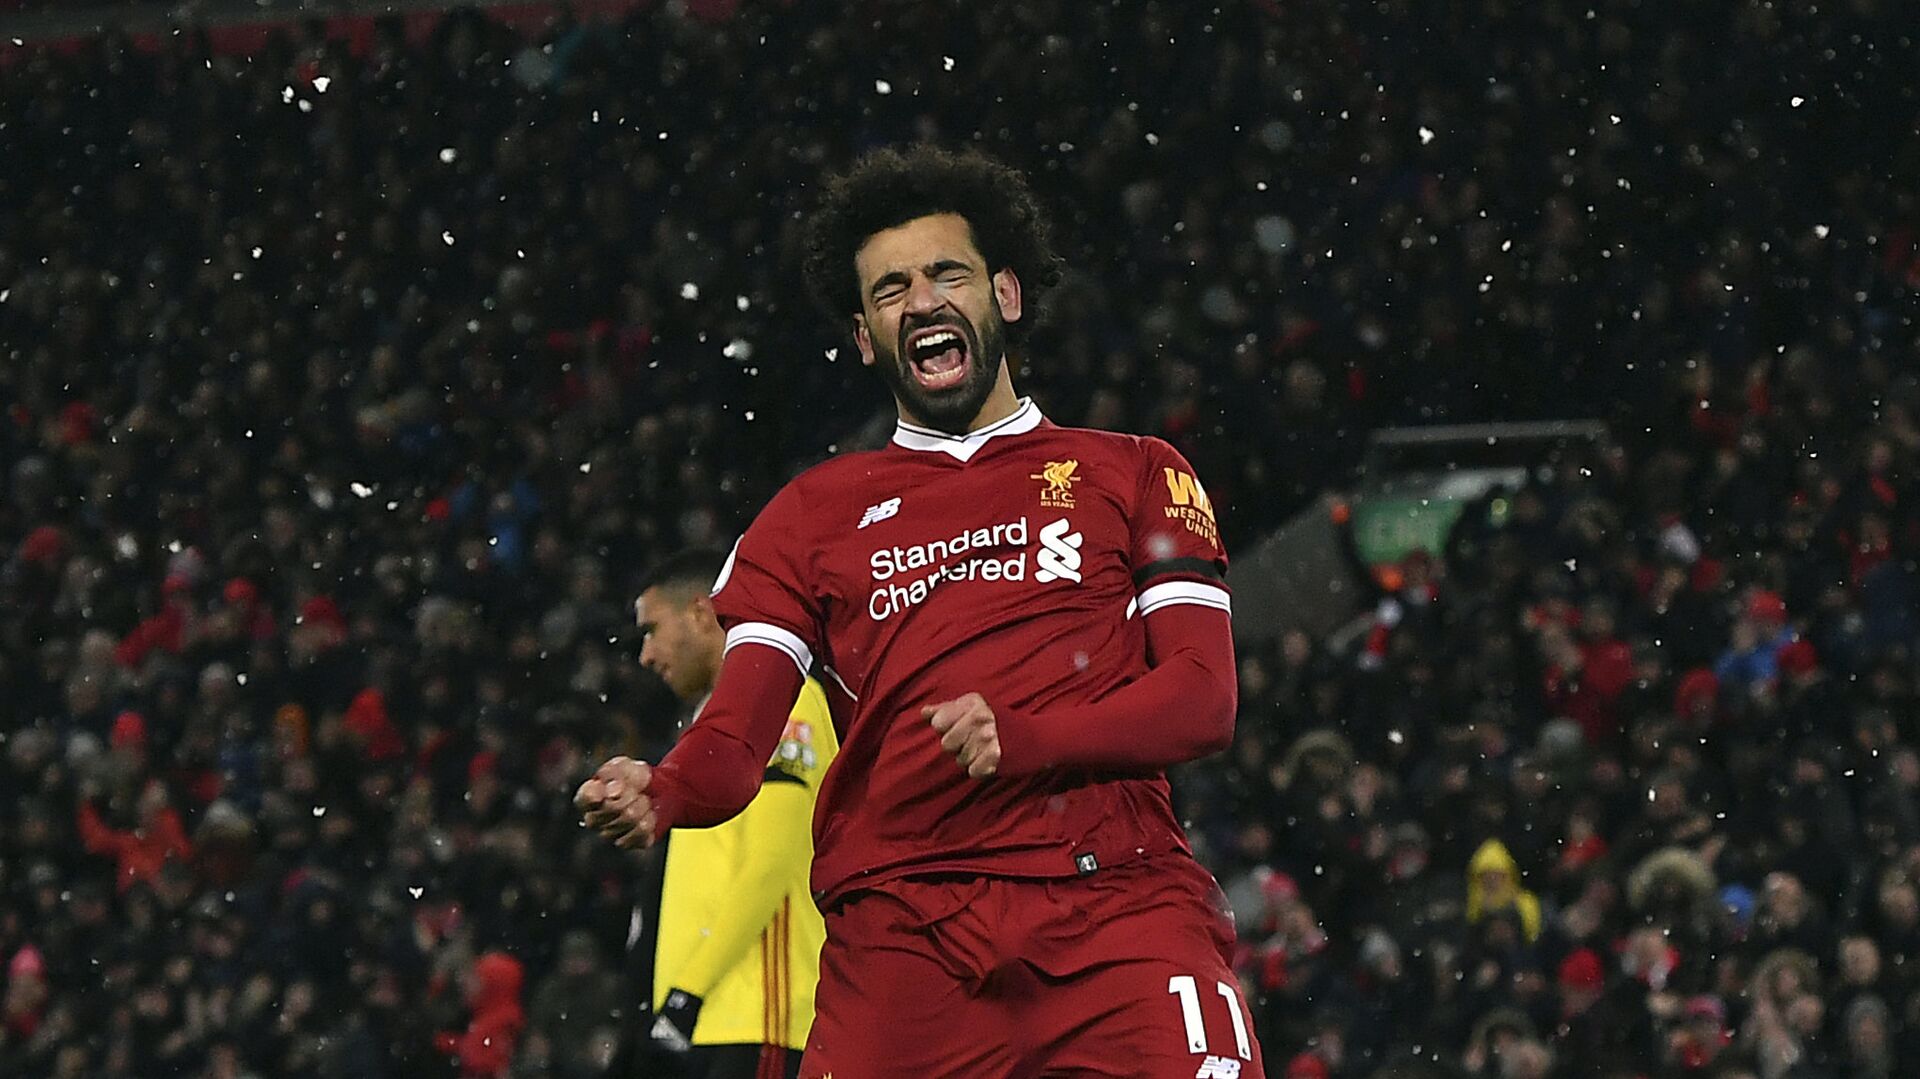 Liverpool's Mohamed Salah celebrates scoring his hat-trick during the English Premier League soccer match between Liverpool and Watford at Anfield, Liverpool, England - اسپوتنیک افغانستان  , 1920, 26.09.2021